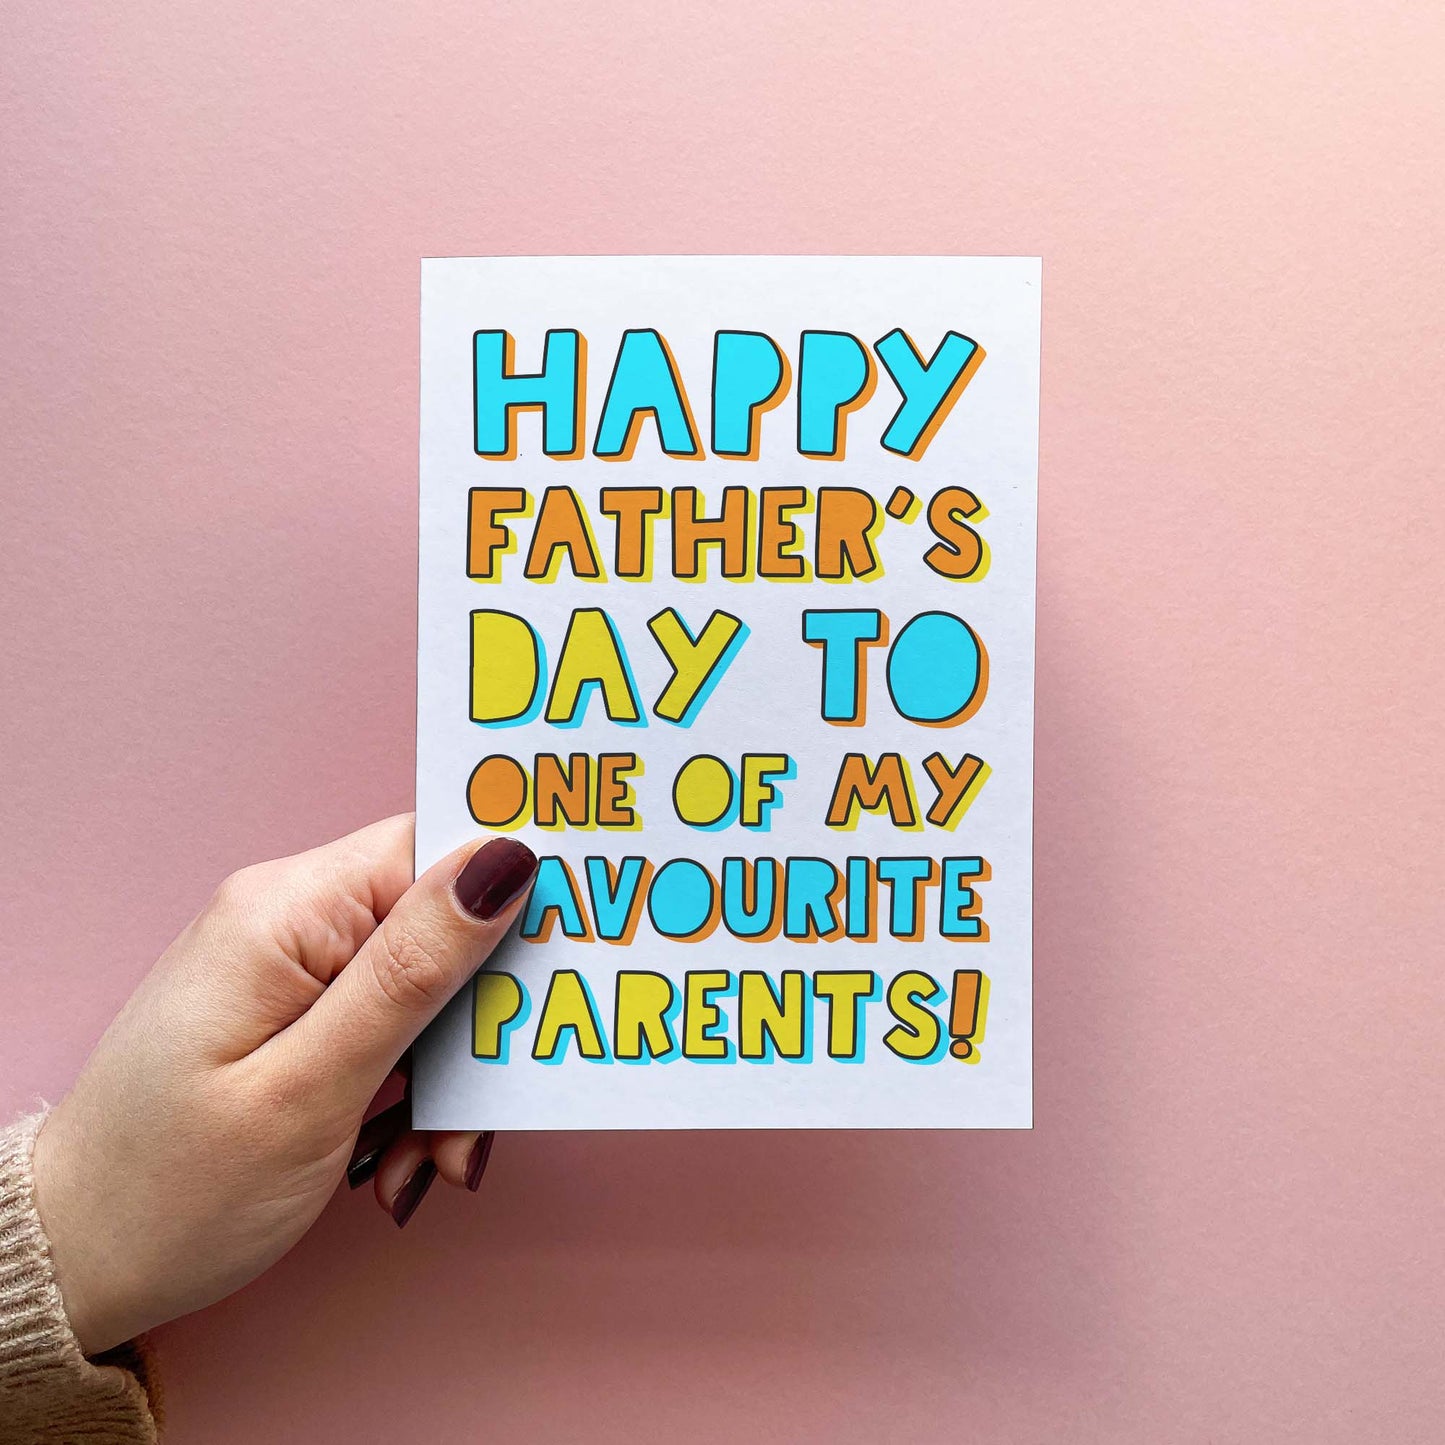 One Of My Favourite Parents - Funny Father's Day Card